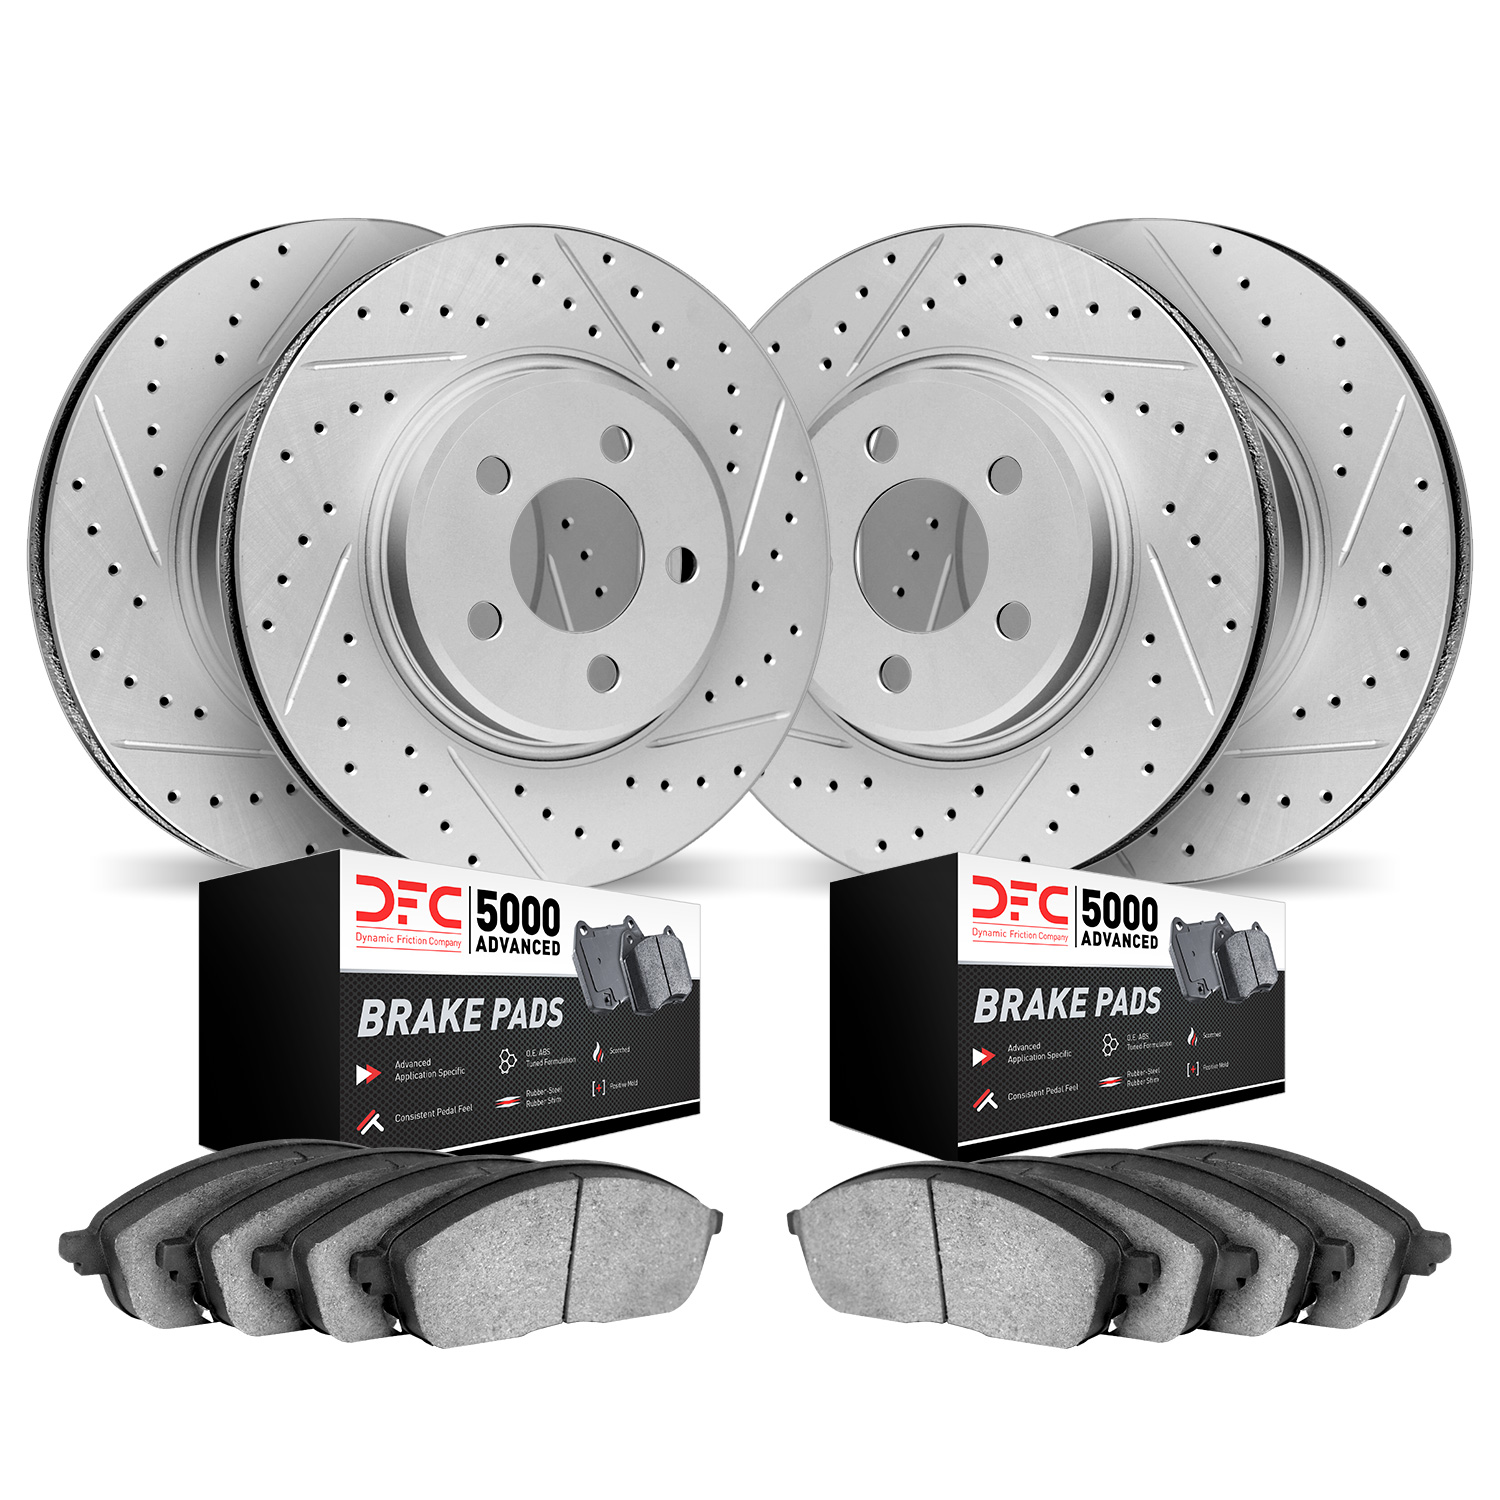 2504-47273 Geoperformance Drilled/Slotted Rotors w/5000 Advanced Brake Pads Kit, 2007-2015 GM, Position: Front and Rear